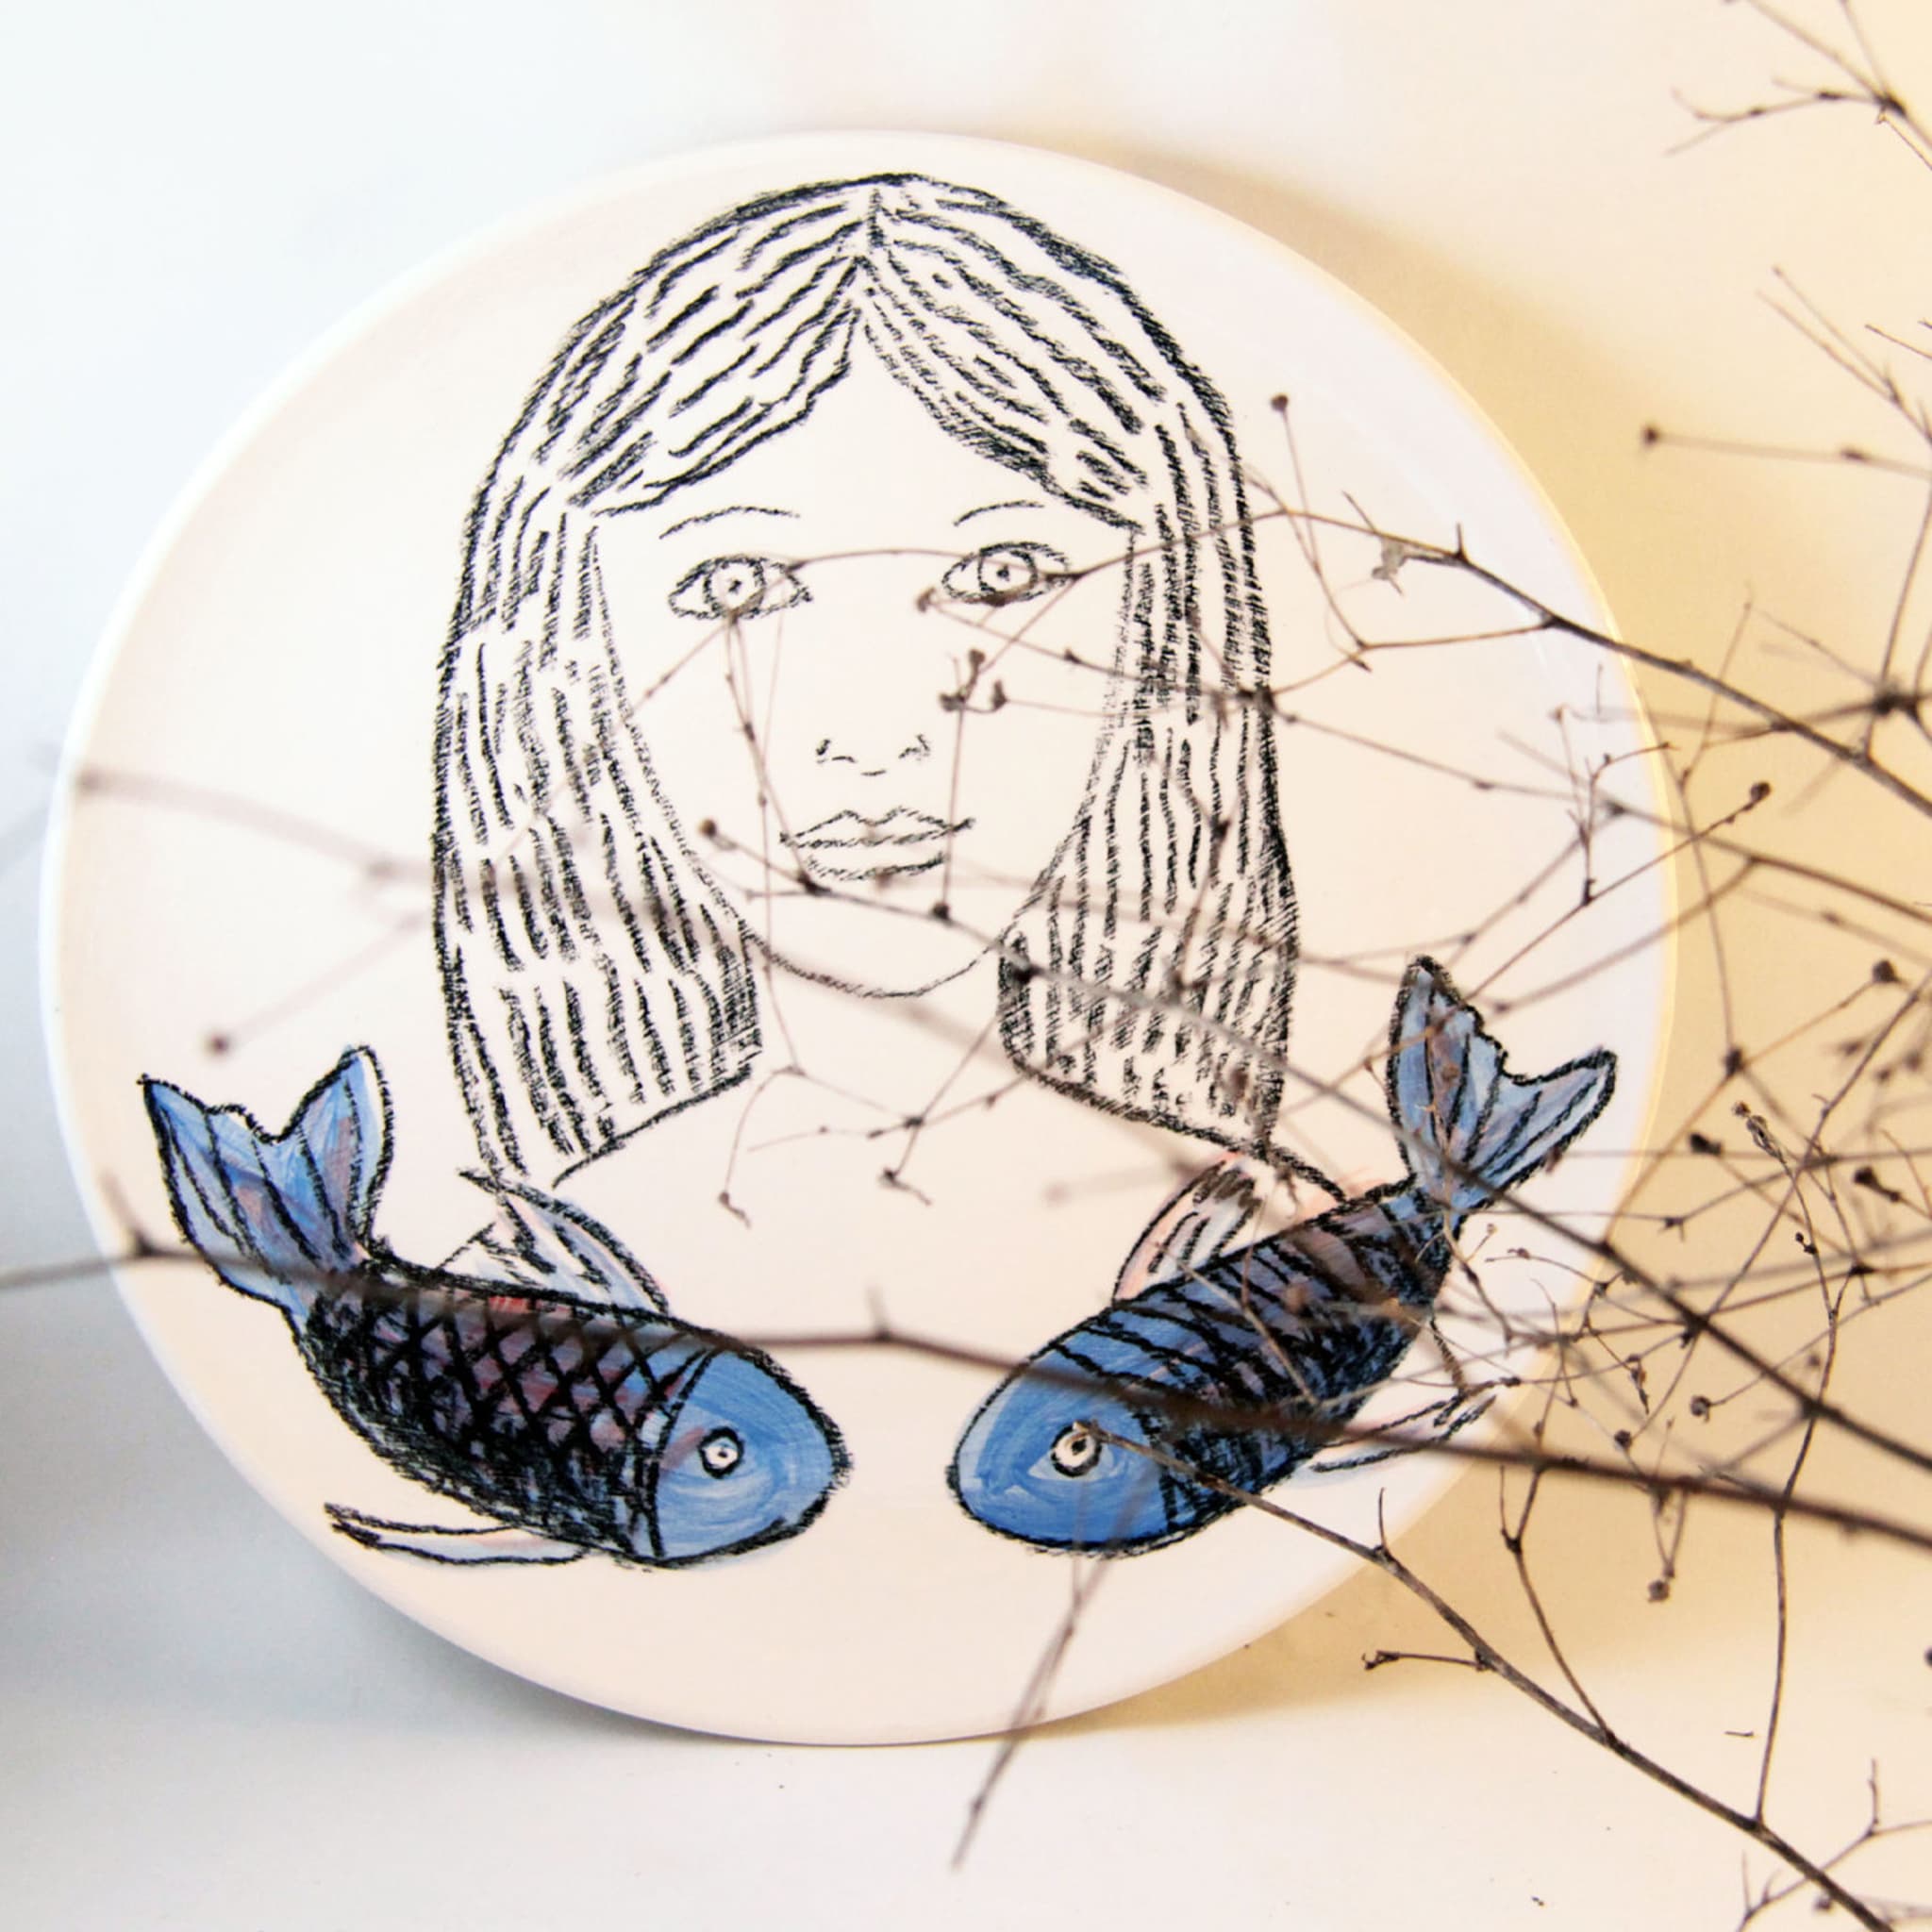 Woman with Fish Decorative Plate - Alternative view 1